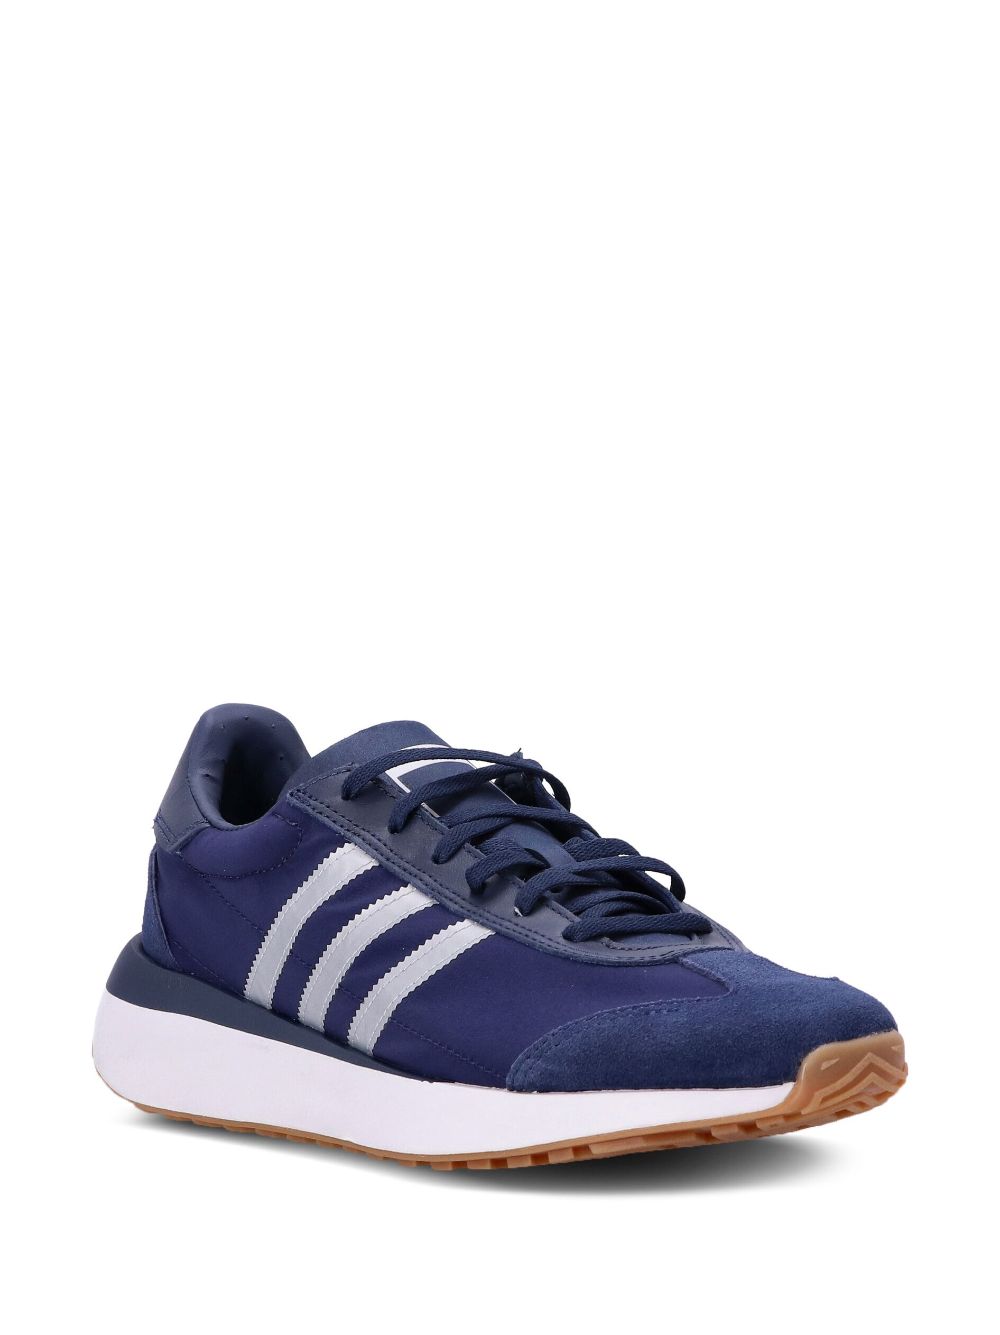 Adidas Originals Country Xlg Low-top Trainers In Blue